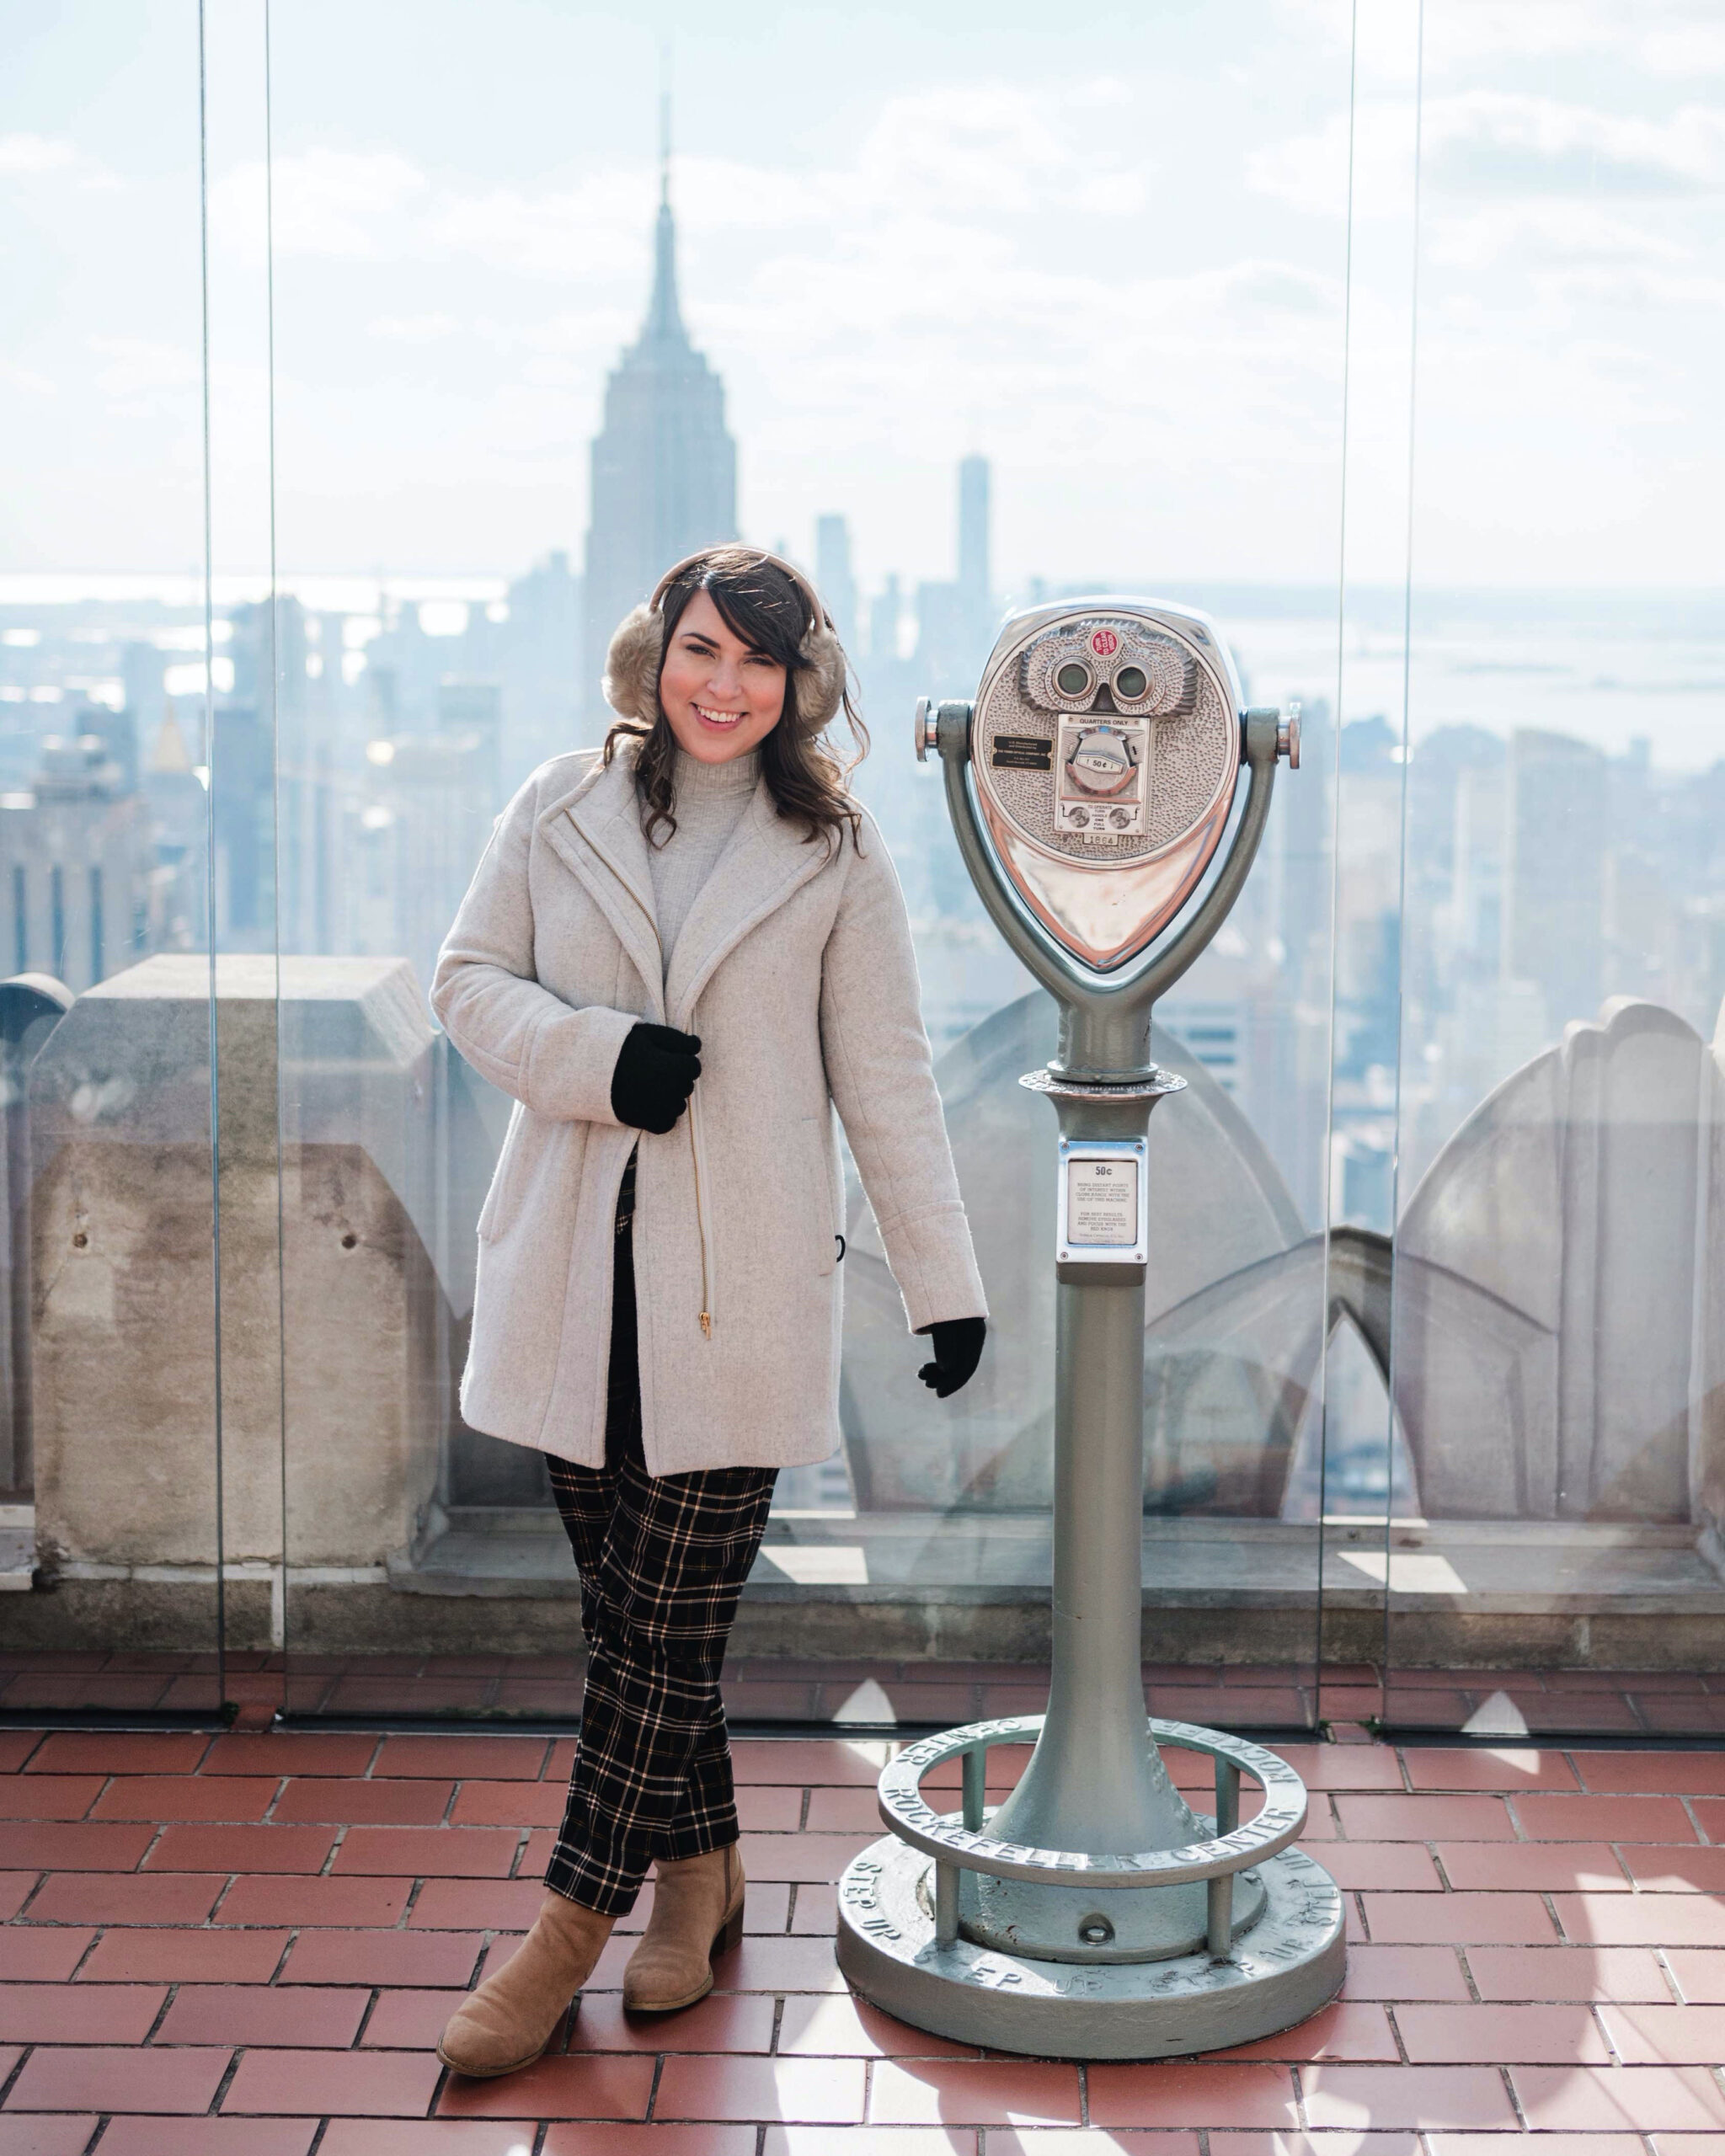 Brittney Naylor wearing black plaid pants, brown boots, grey petticoat, black gloves, and ear muffs on top of the rockefeller plaza with views of the empire state building and other sky scrapers in New York City.